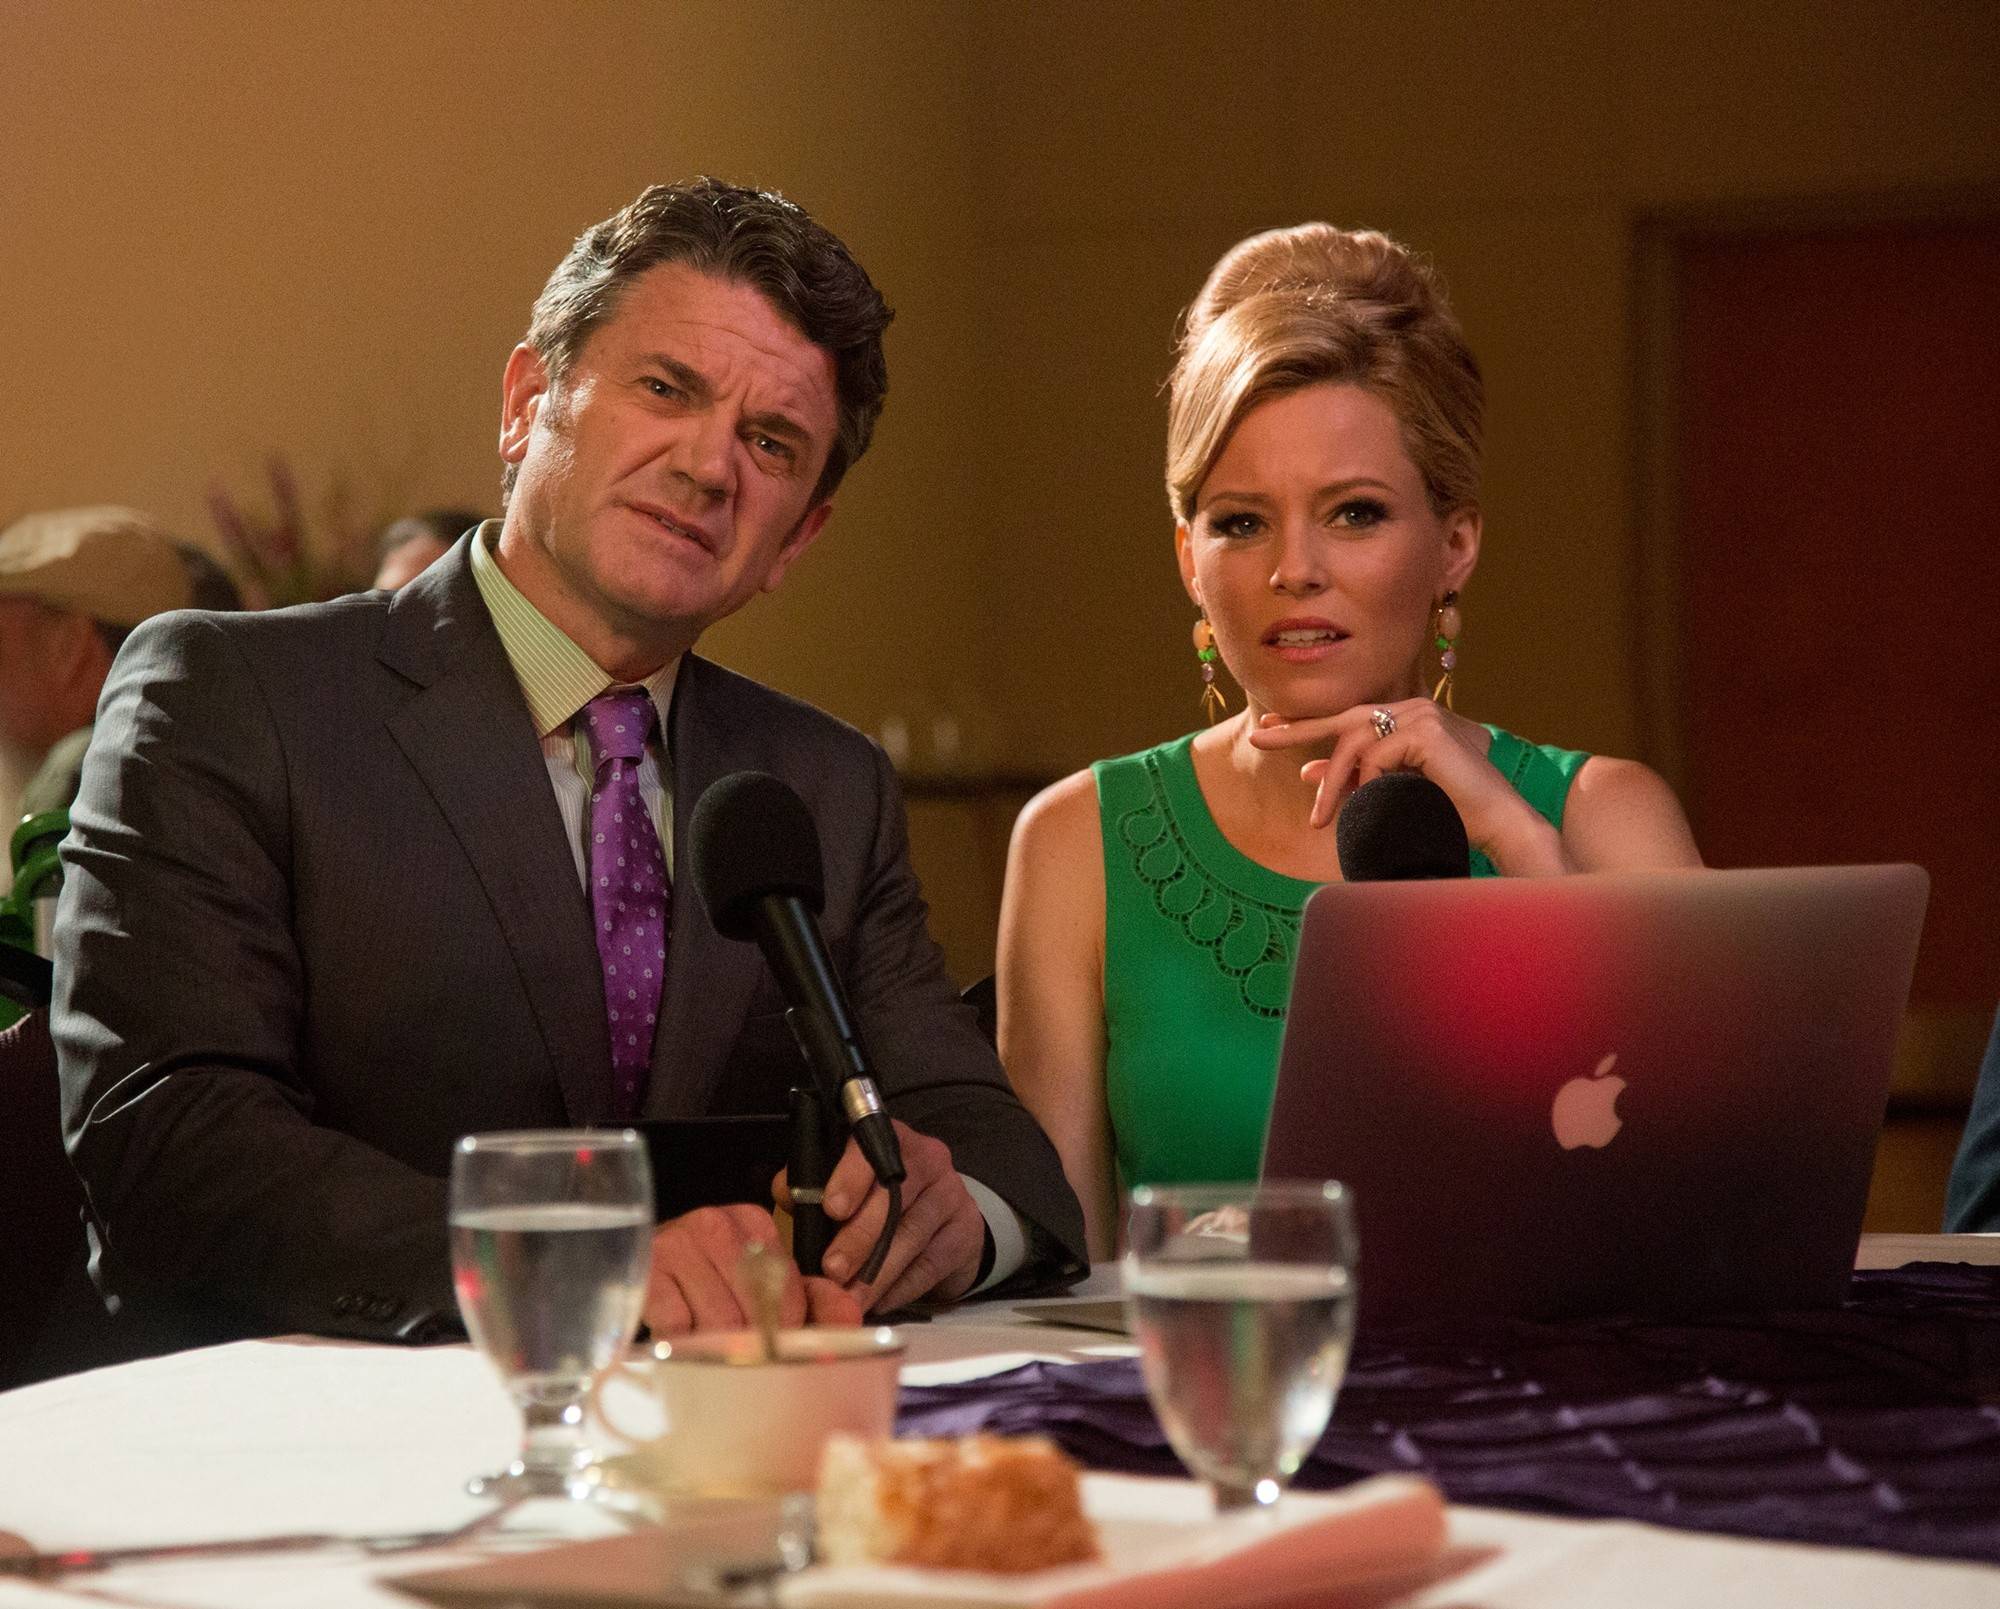 John Michael Higgins stars as John and Elizabeth Banks stars as Gail in Universal Pictures' Pitch Perfect 2 (2015)